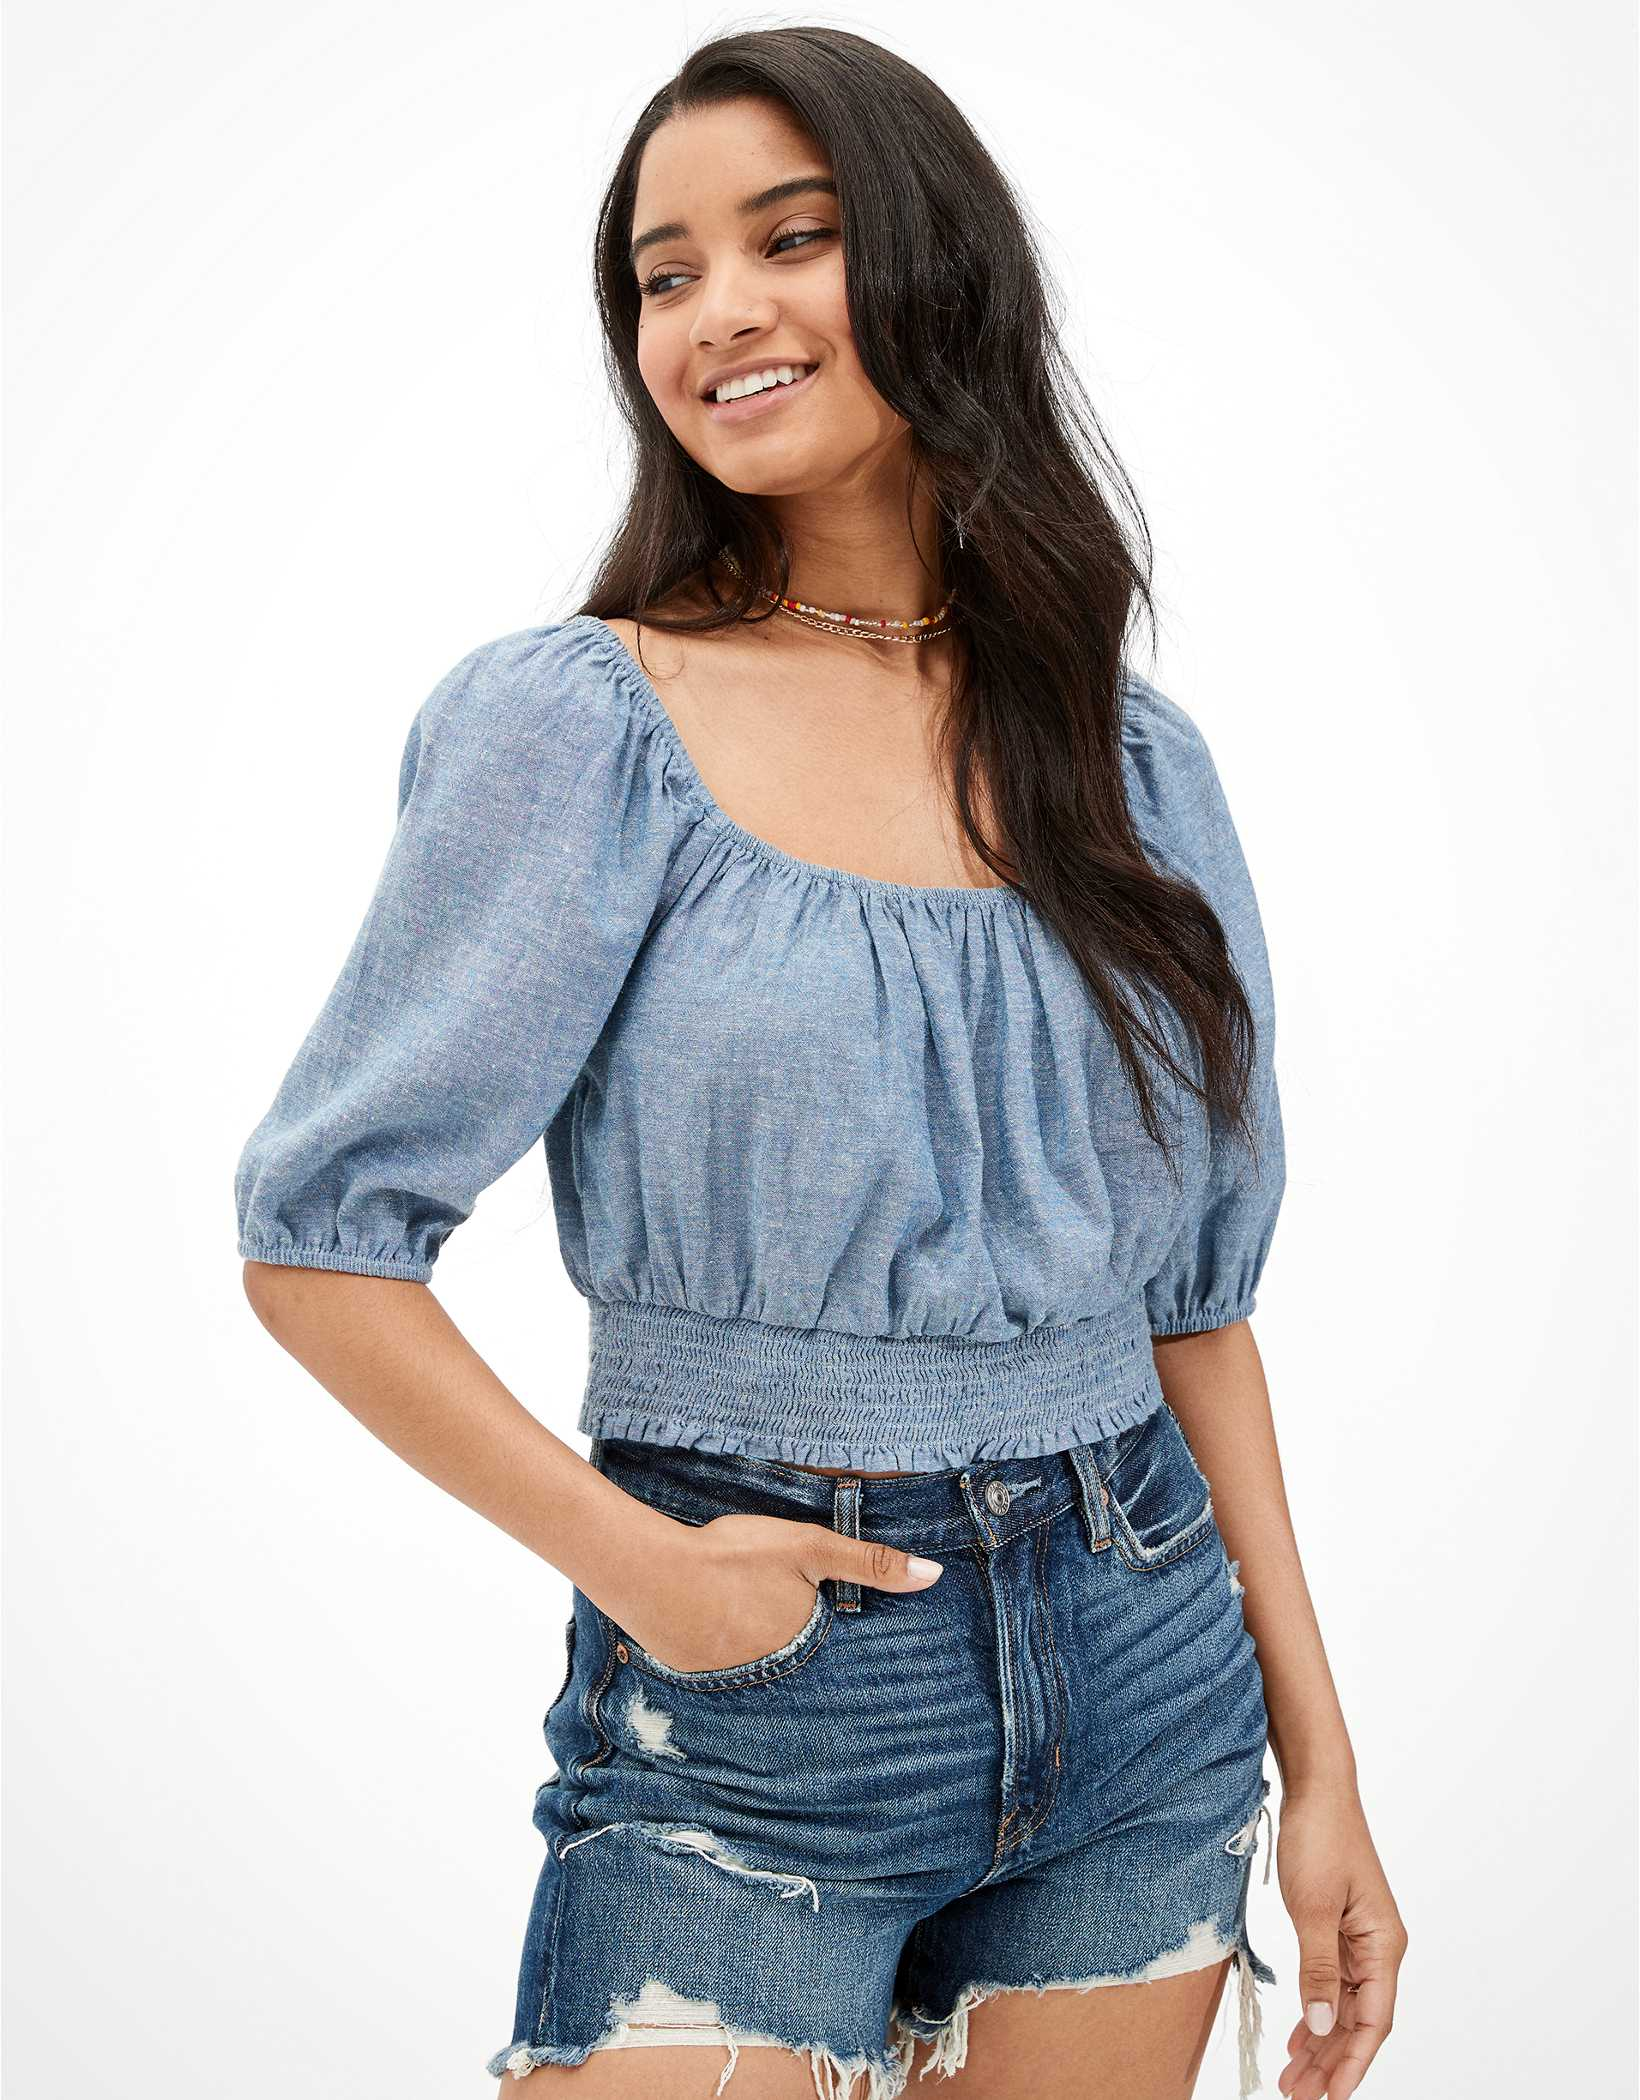 Up to 60% Off Women's Clearance Styles @American Eagle